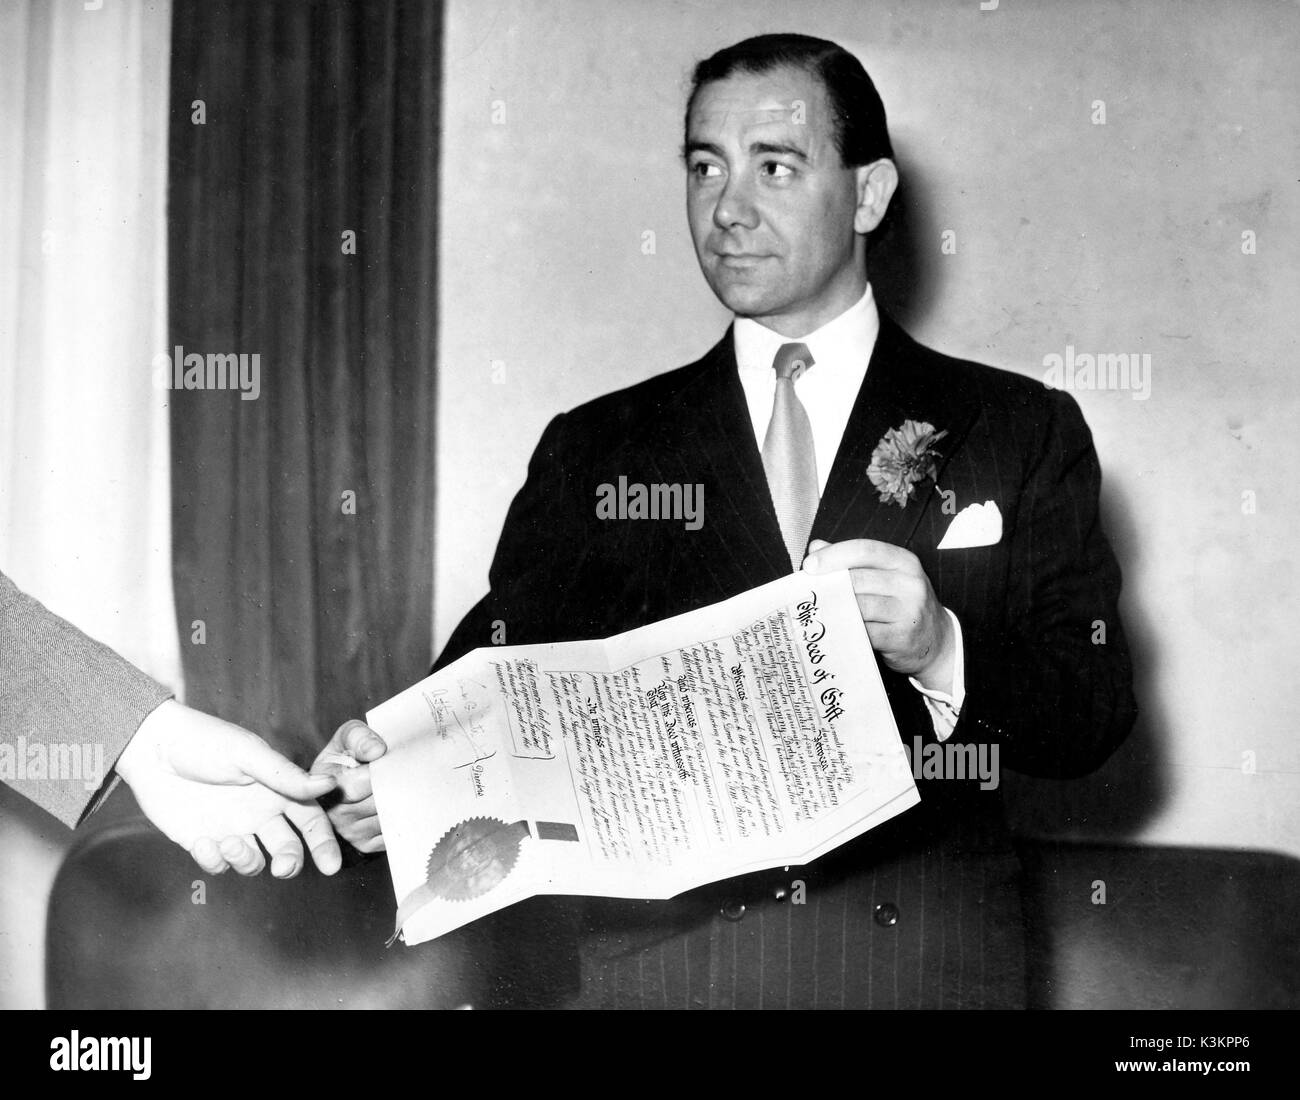 GEORGE MINTER [1911 - 1966]  British film producer and head of Renown Pictures a film producing and distributing company, seen here with a document registering the co-operation of the governing body of Rugby School where Renown filmed Tom Brown's Schooldays [Br 1951] was set in the school. Stock Photo